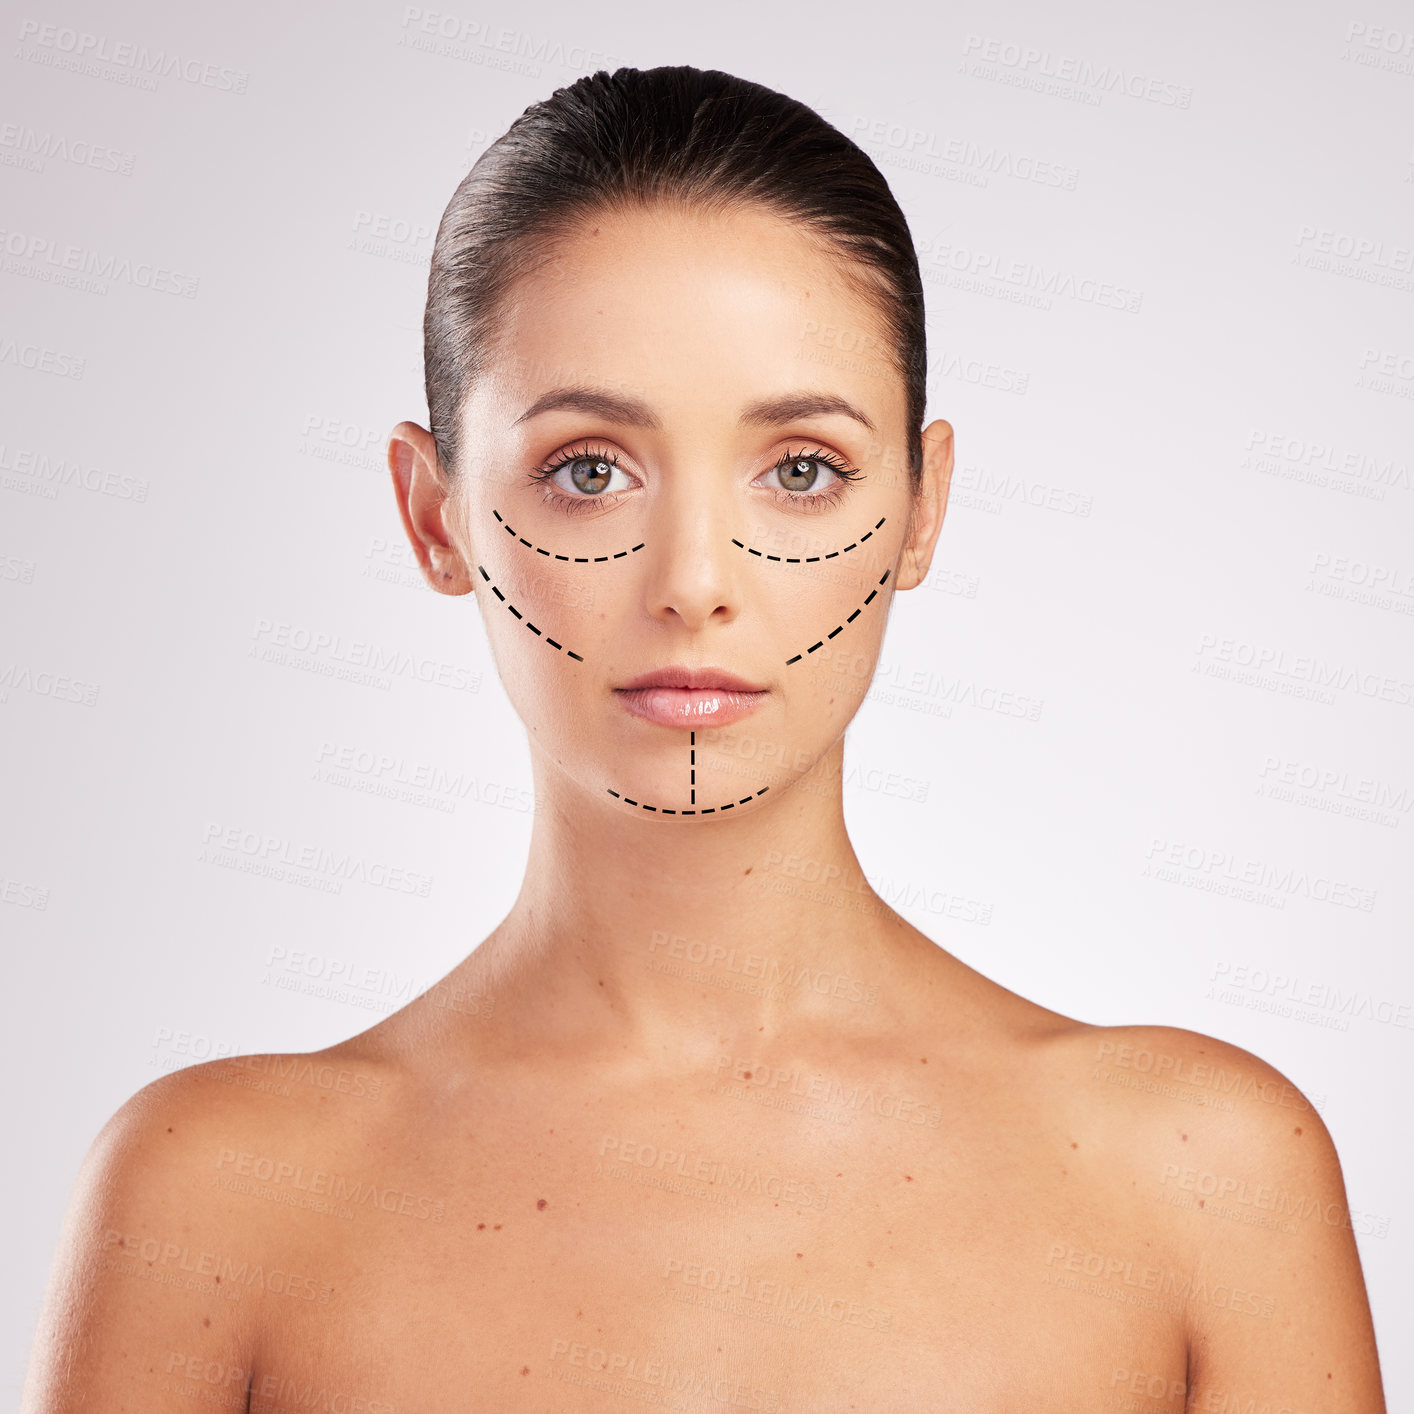 Buy stock photo Shot of an attractive young woman with cosmetic surgery markings on her face against a studio background